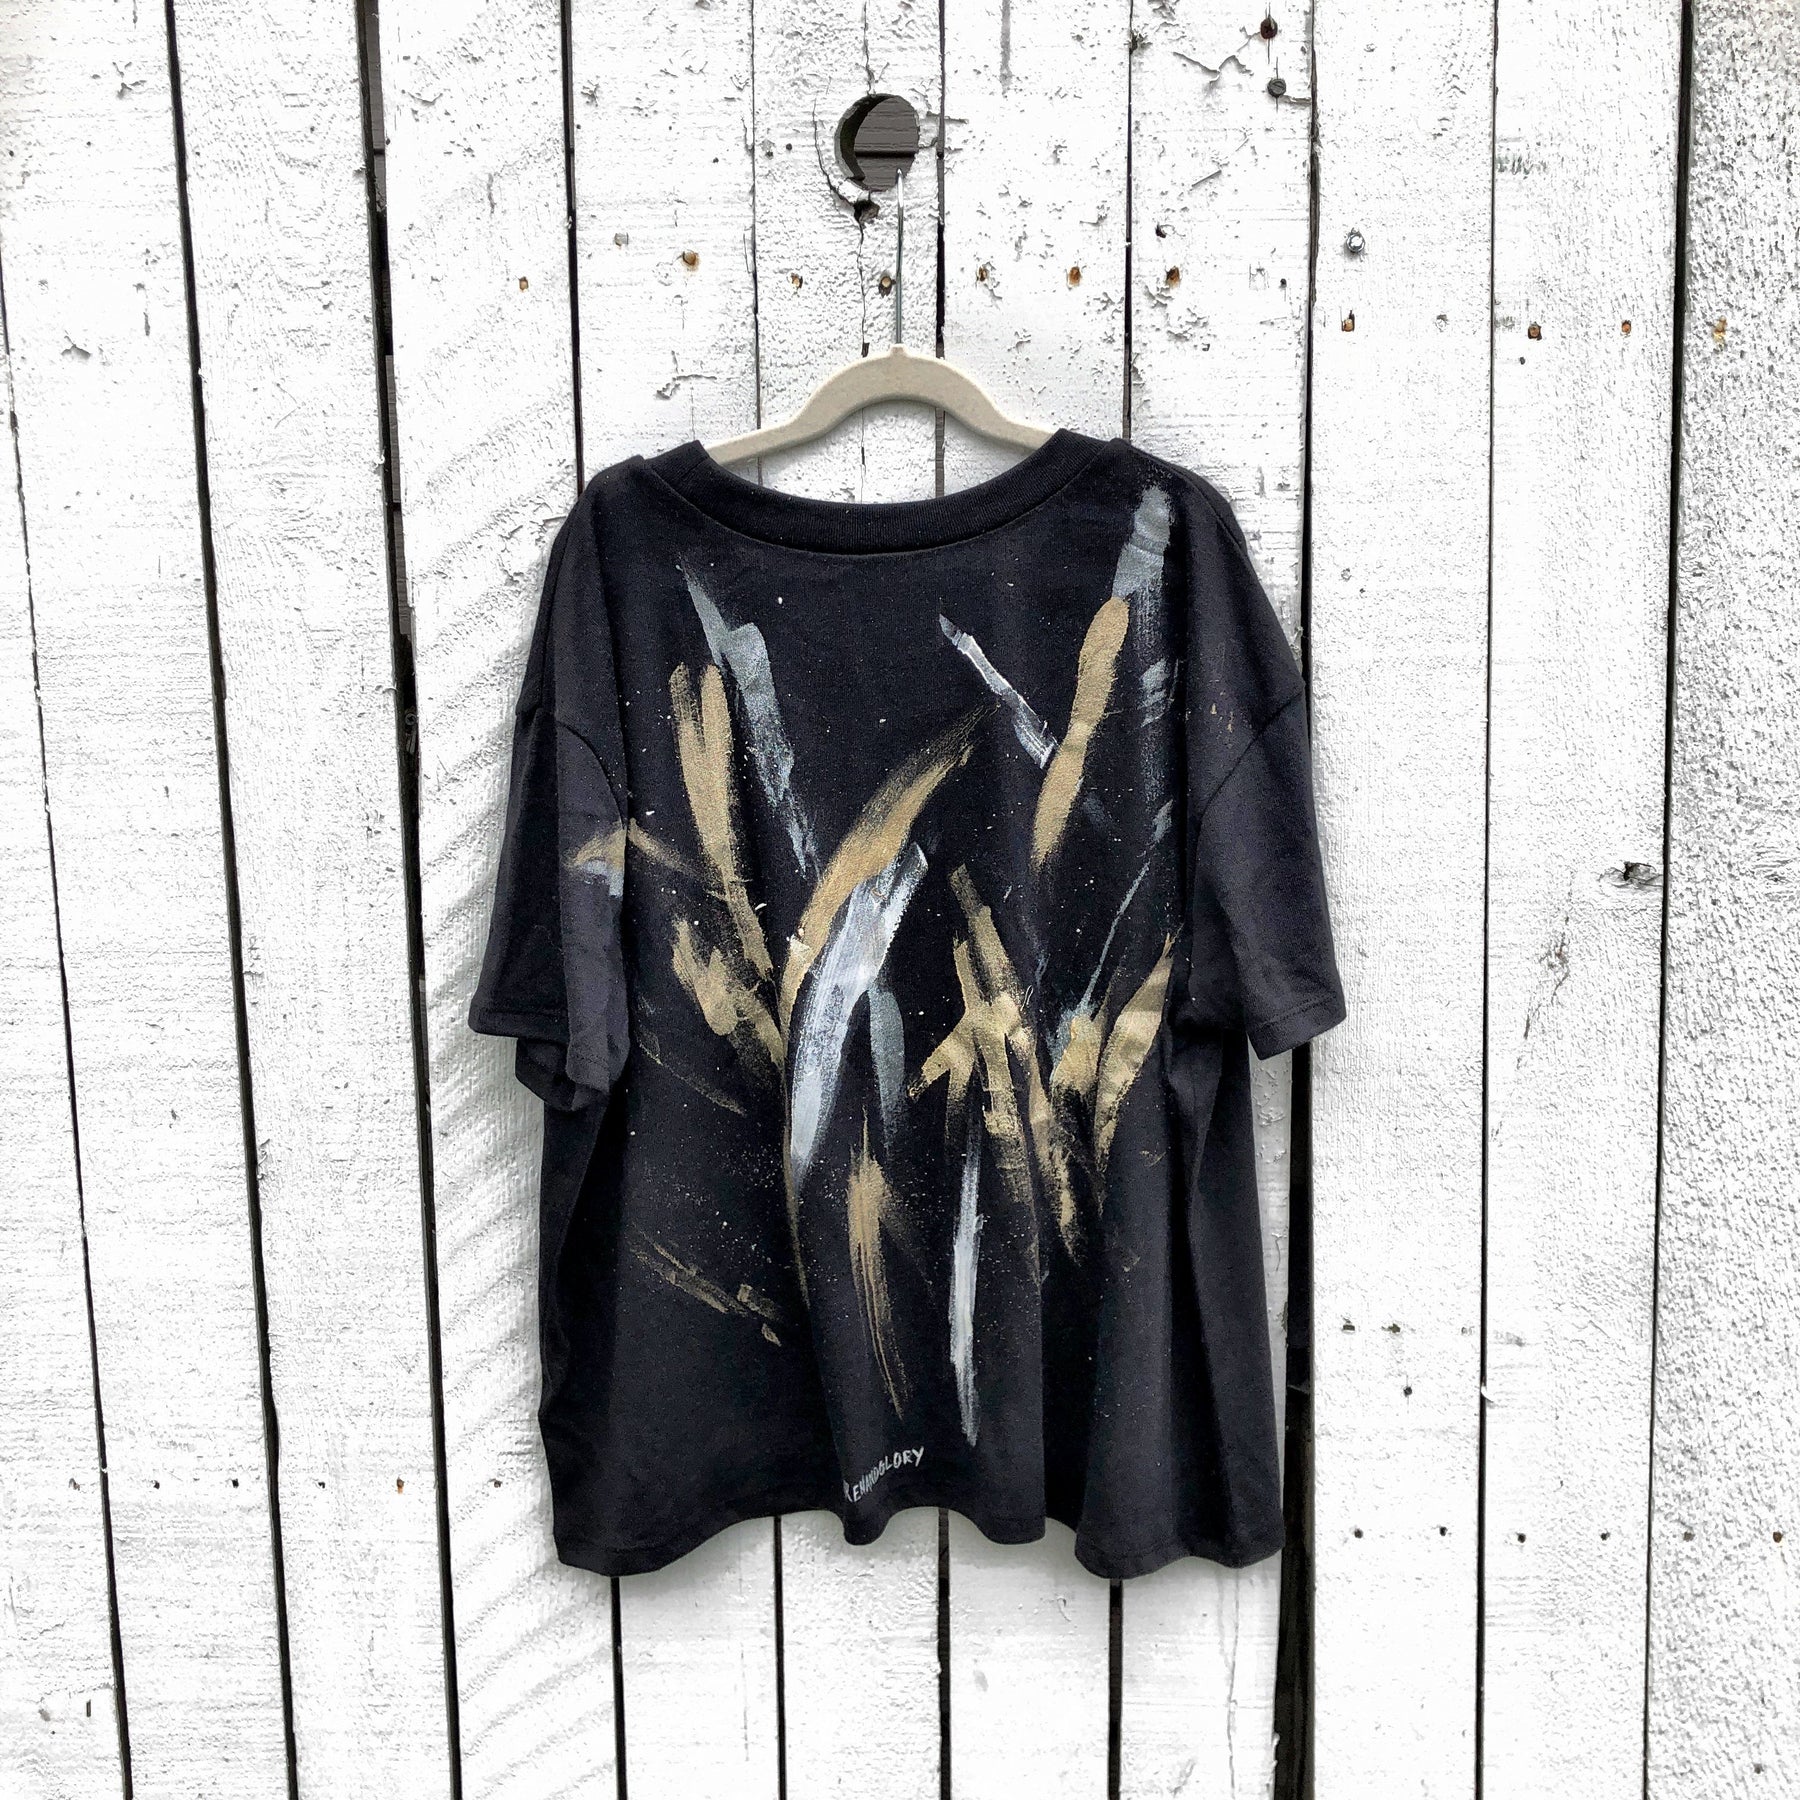 The perfect cropped black T shirt. Assorted color metallics and white splatter and stripes painted on back, with small stars painted on front, upper left side in gold. Signed @wrenandglory.